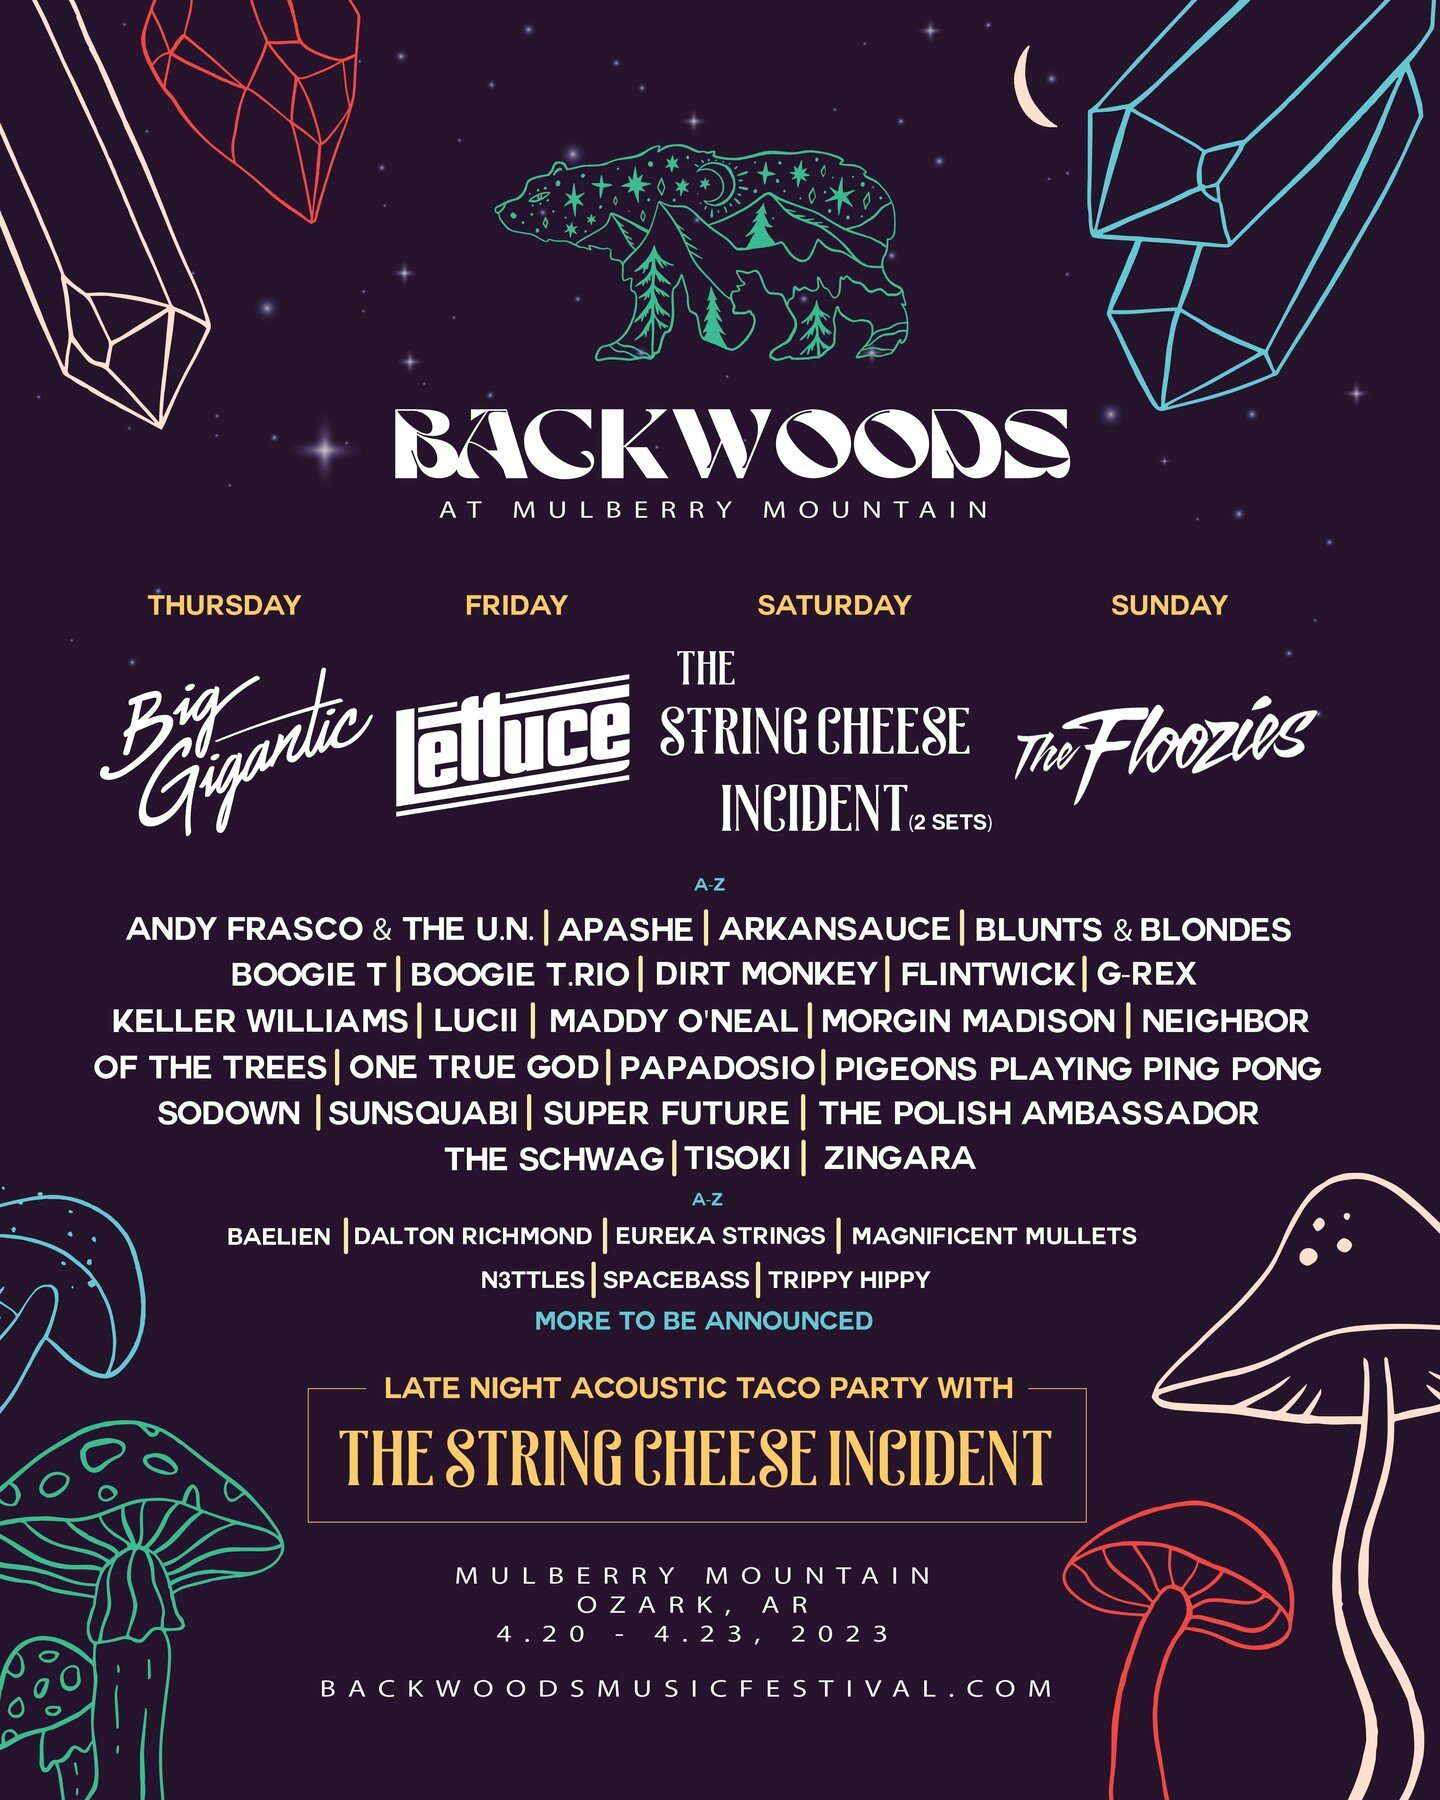 🔮Hyped to be headed to @backwoodsmusicfestival in Arkansas again this year! See ya in April fam👊

🎟➞ Link in bio